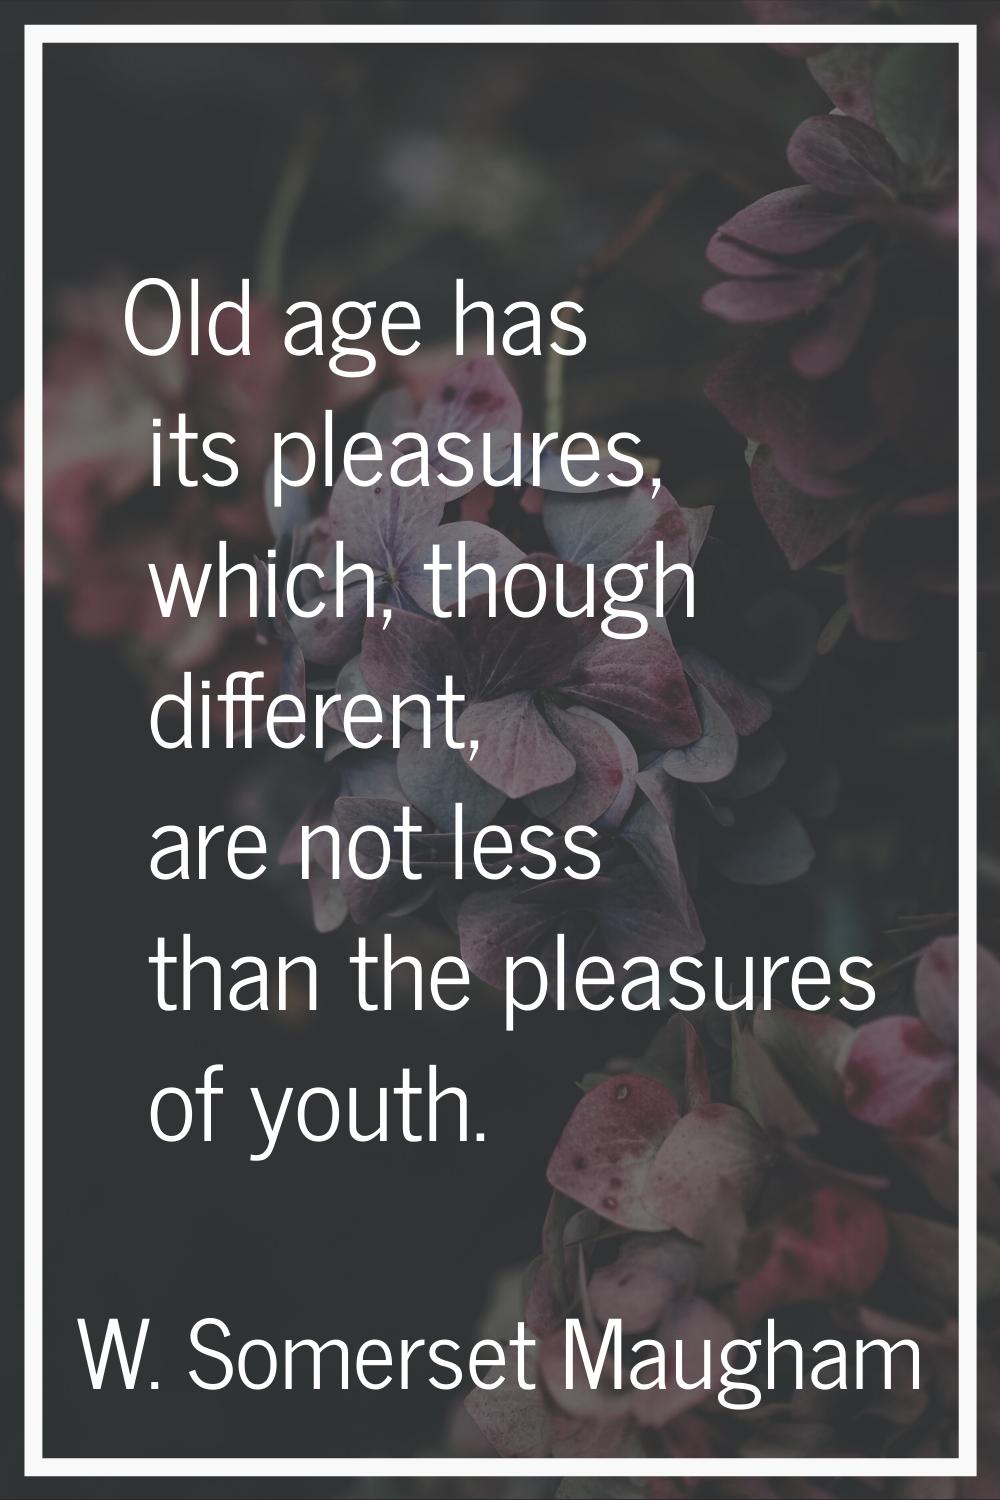 Old age has its pleasures, which, though different, are not less than the pleasures of youth.